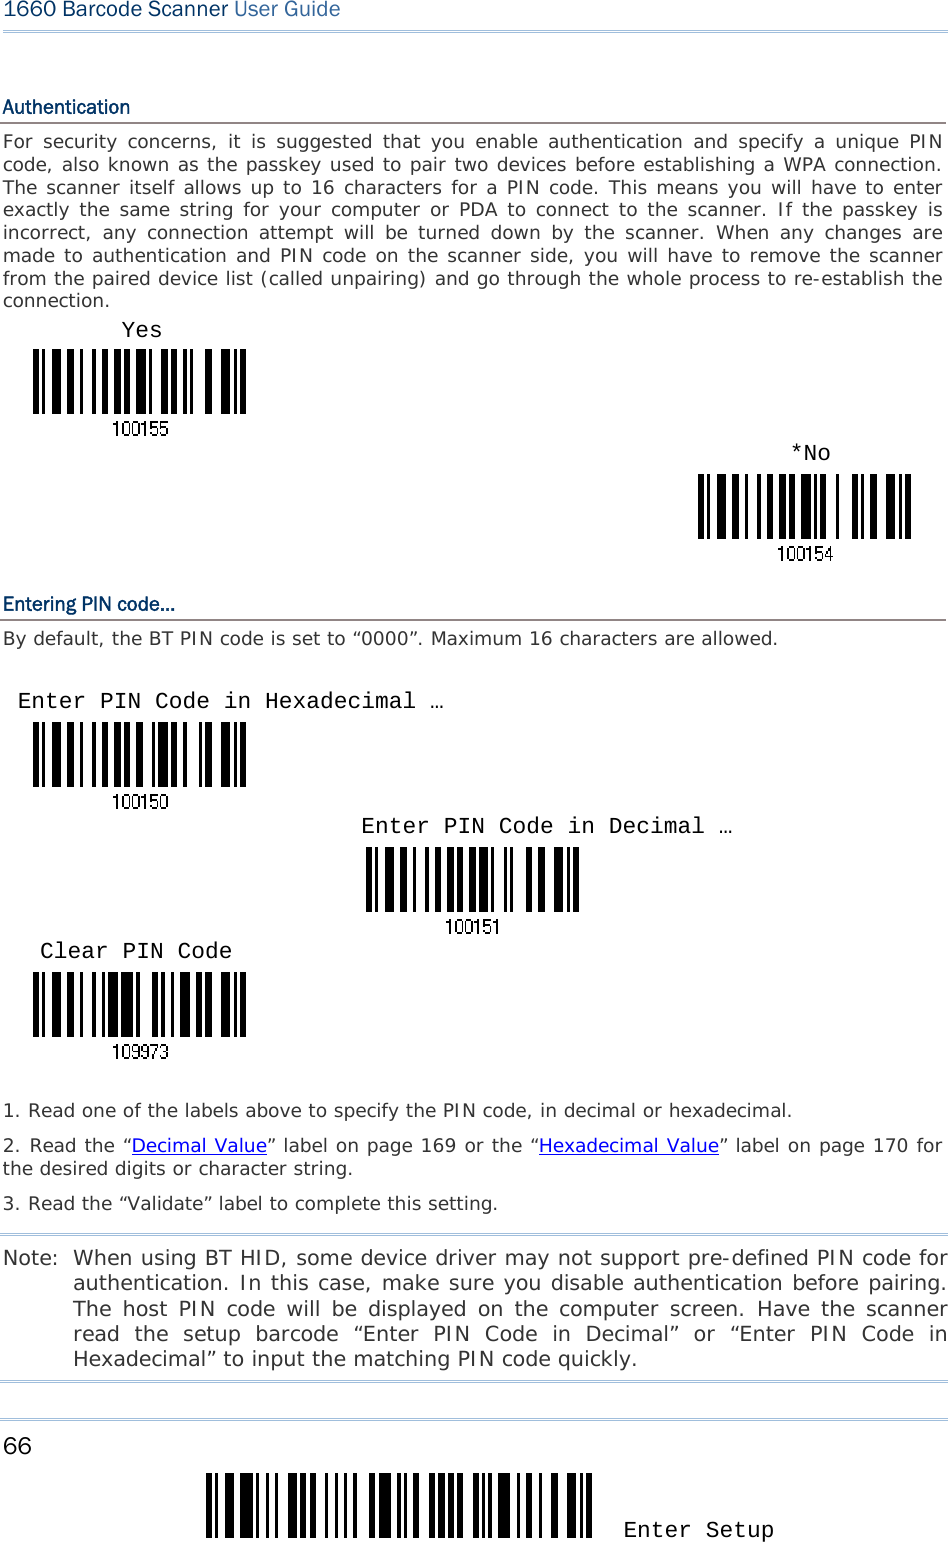 66 Enter Setup 1660 Barcode Scanner User Guide  Authentication For security concerns, it is suggested that you enable authentication and specify a unique PIN code, also known as the passkey used to pair two devices before establishing a WPA connection. The scanner itself allows up to 16 characters for a PIN code. This means you will have to enter exactly the same string for your computer or PDA to connect to the scanner. If the passkey is incorrect, any connection attempt will be turned down by the scanner. When any changes are made to authentication and PIN code on the scanner side, you will have to remove the scanner from the paired device list (called unpairing) and go through the whole process to re-establish the connection.  Entering PIN code… By default, the BT PIN code is set to “0000”. Maximum 16 characters are allowed.       1. Read one of the labels above to specify the PIN code, in decimal or hexadecimal.  2. Read the “Decimal Value” label on page 169 or the “Hexadecimal Value” label on page 170 for the desired digits or character string.  3. Read the “Validate” label to complete this setting. Note: When using BT HID, some device driver may not support pre-defined PIN code for authentication. In this case, make sure you disable authentication before pairing. The host PIN code will be displayed on the computer screen. Have the scanner read the setup barcode “Enter PIN Code in Decimal” or “Enter PIN Code in Hexadecimal” to input the matching PIN code quickly. Enter PIN Code in Hexadecimal … Enter PIN Code in Decimal … Yes *No Clear PIN Code 